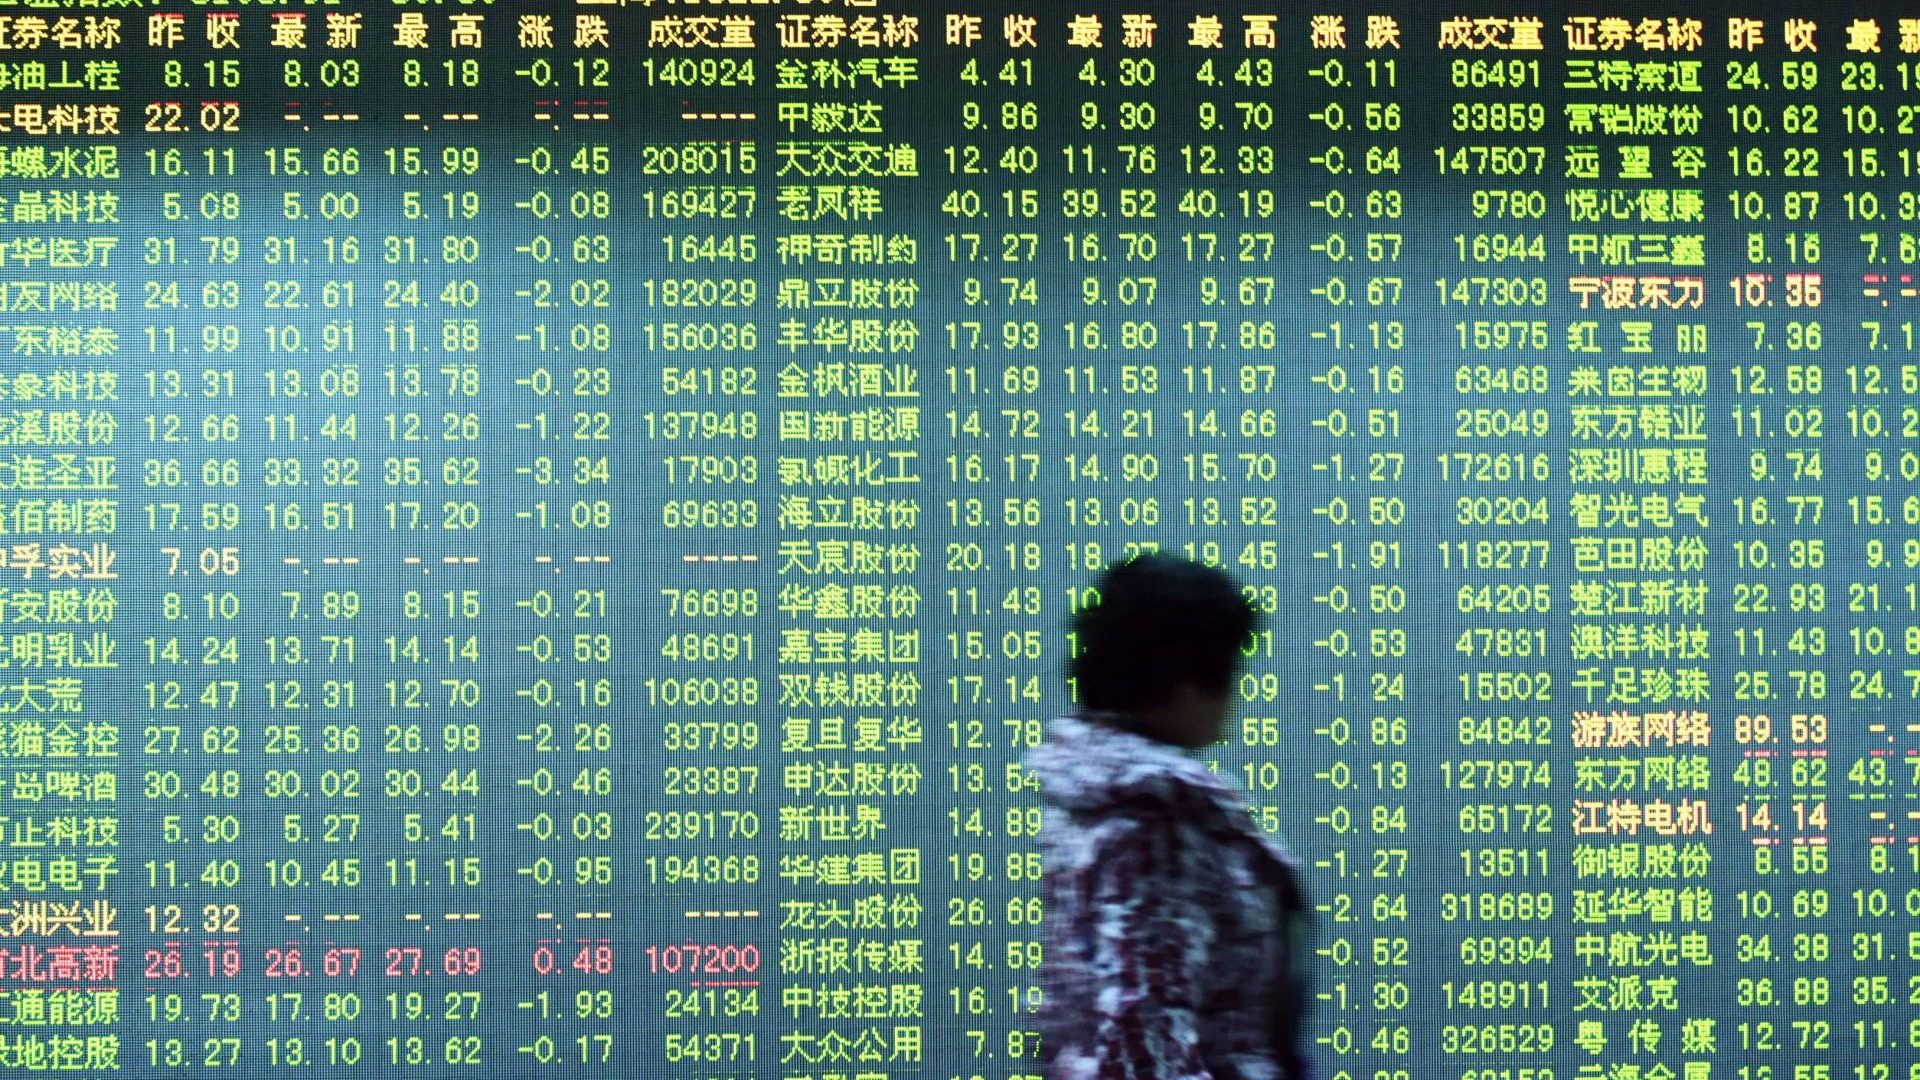 The Shanghai stock market has fallen 22% in the past 12 months. Photo: STR/AFP/Getty